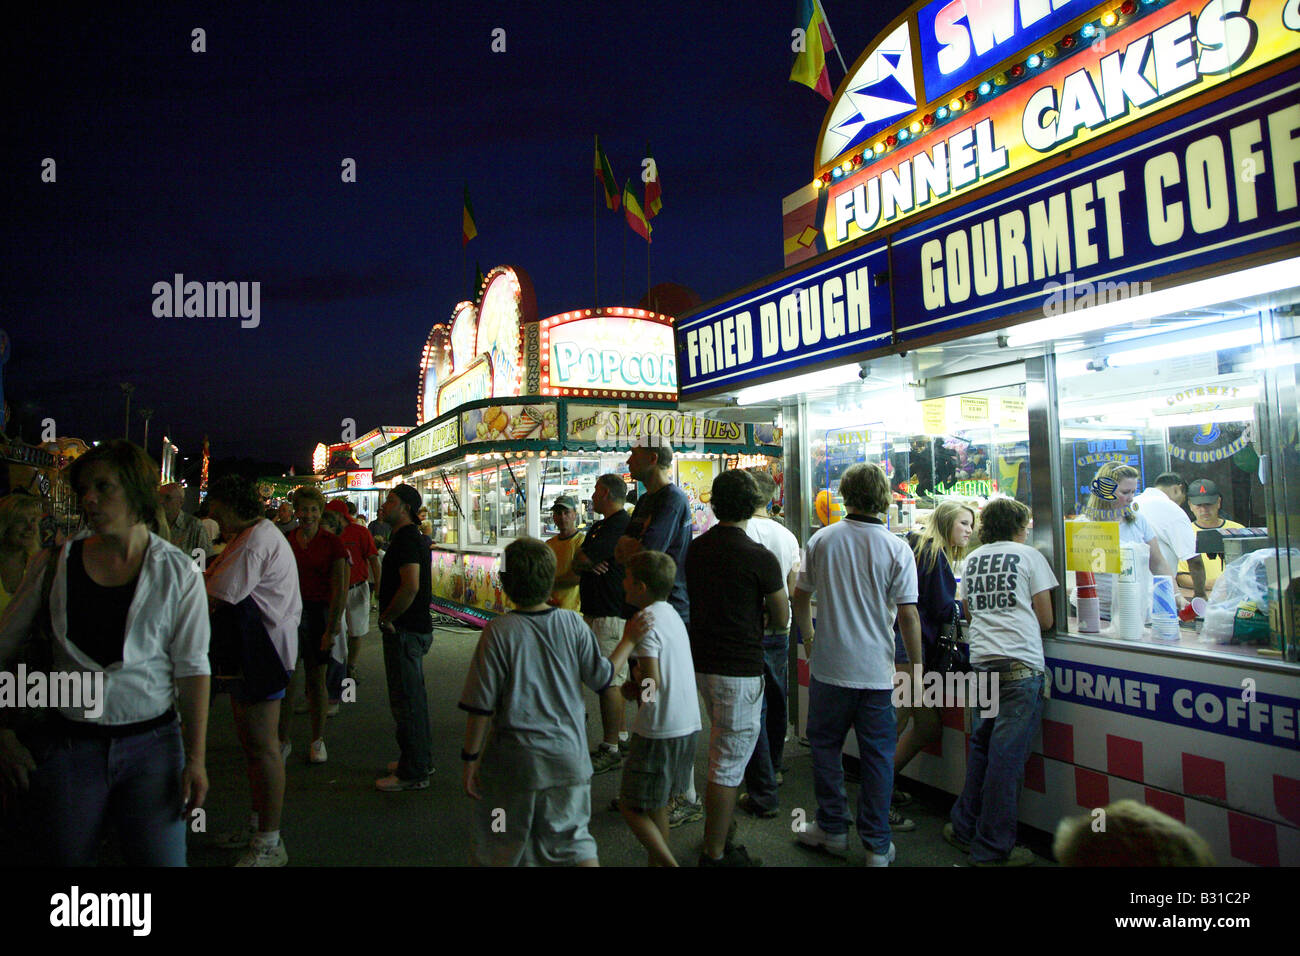 Food stalls at fair lit up at night.  Closest selling funnel cakes and fried dough with popcorn stall behind.  Crowd in dark on Stock Photo